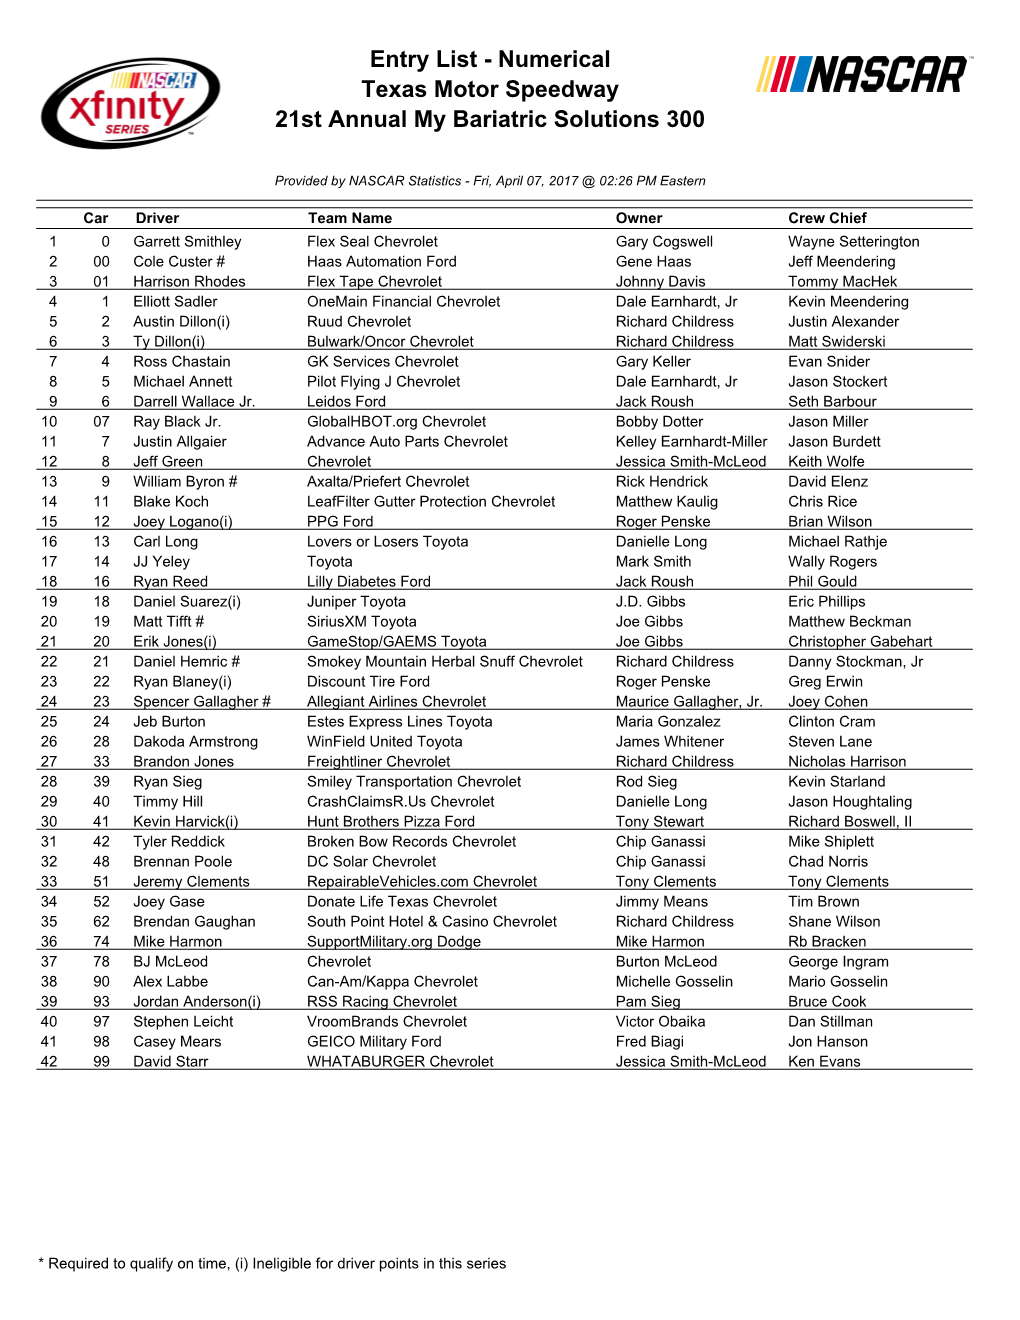 Entry List - Numerical Texas Motor Speedway 21St Annual My Bariatric Solutions 300